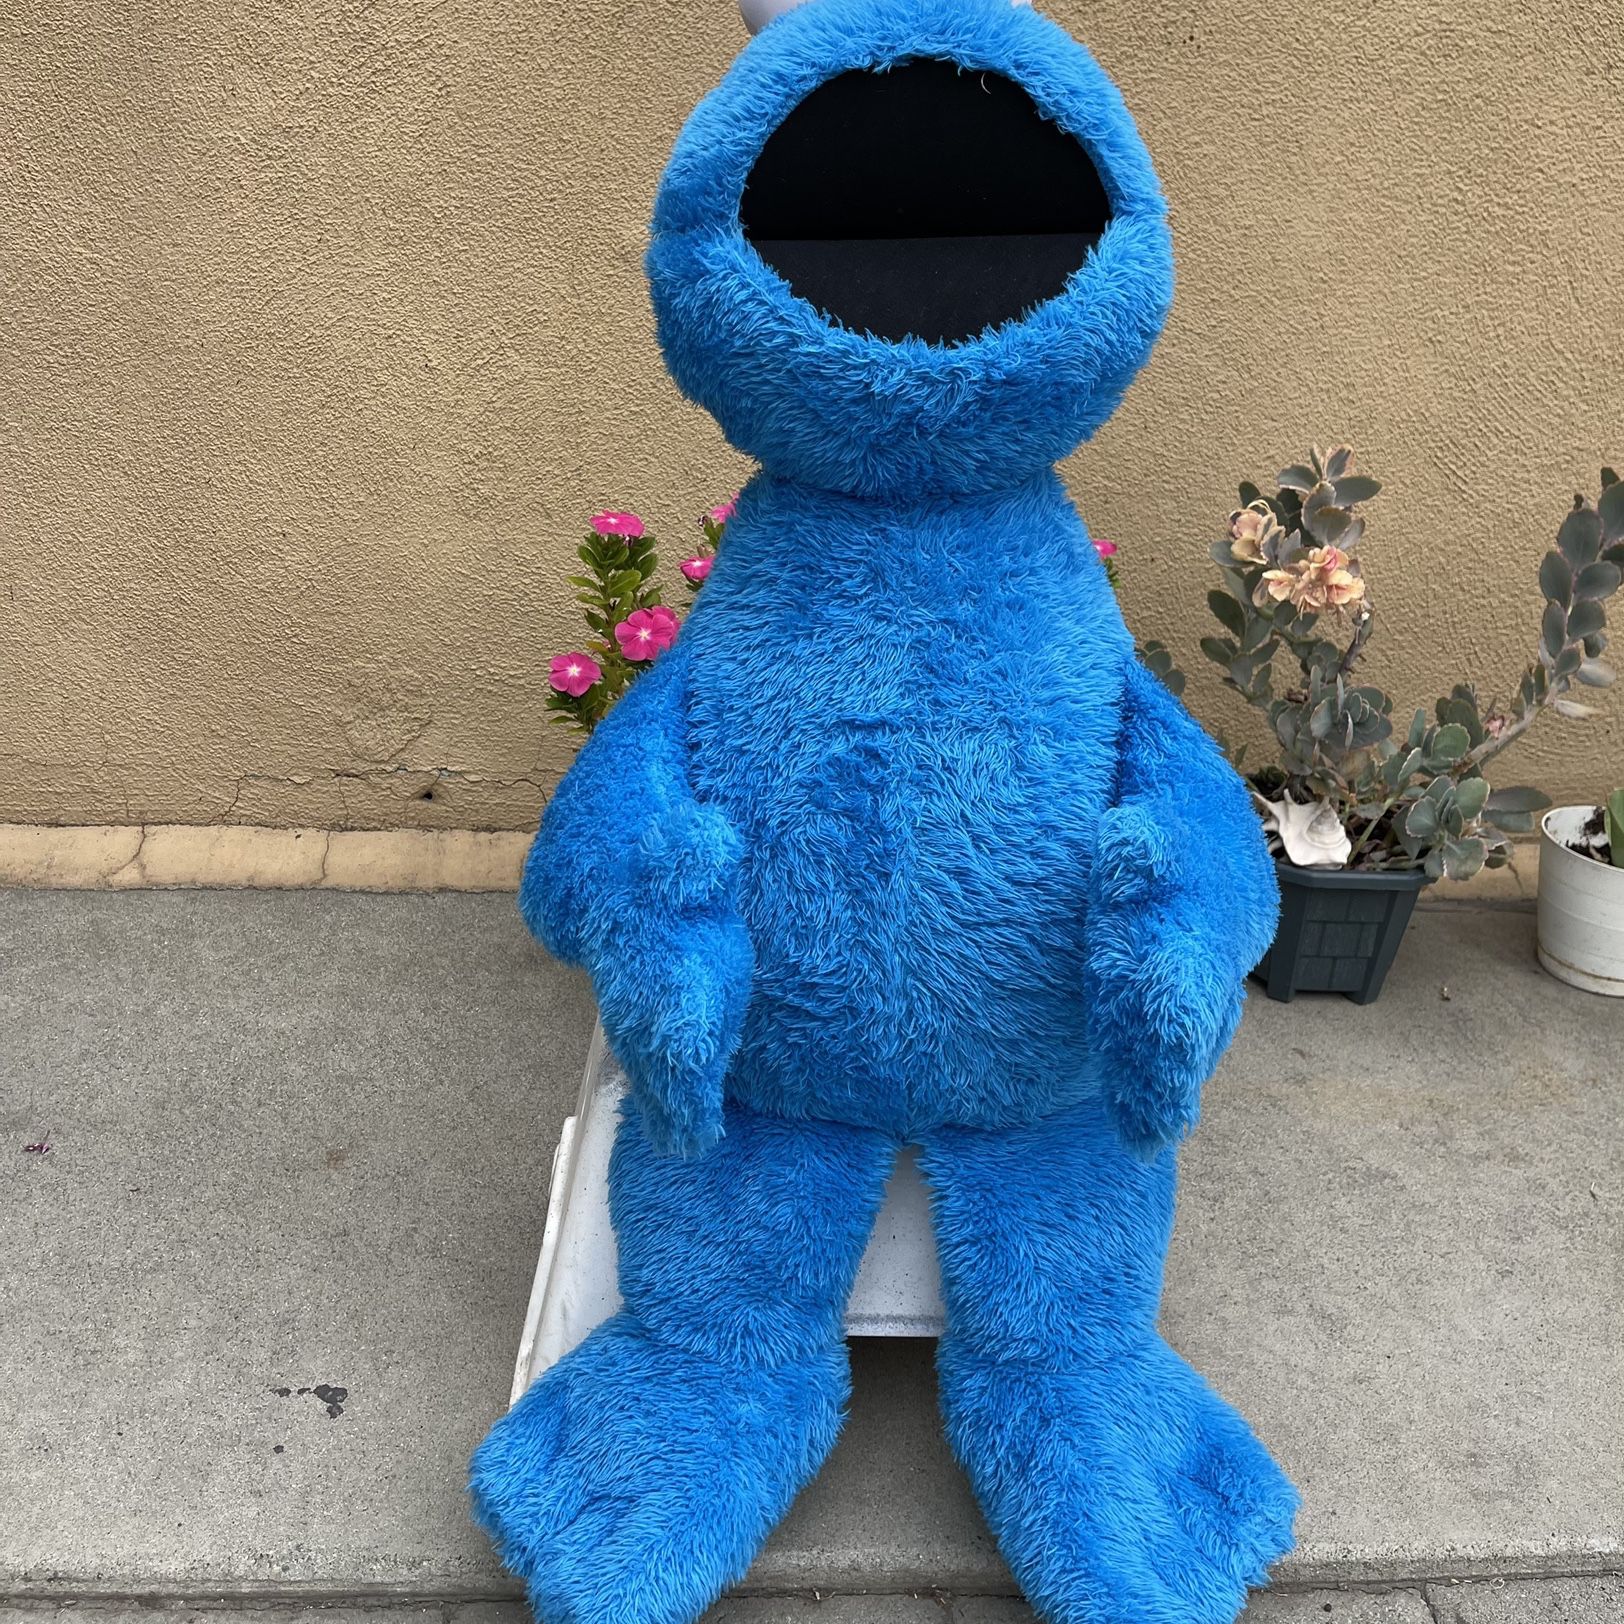 Sesame Street Cookie Monster Plush, 3 Feet and 6 inches Tall